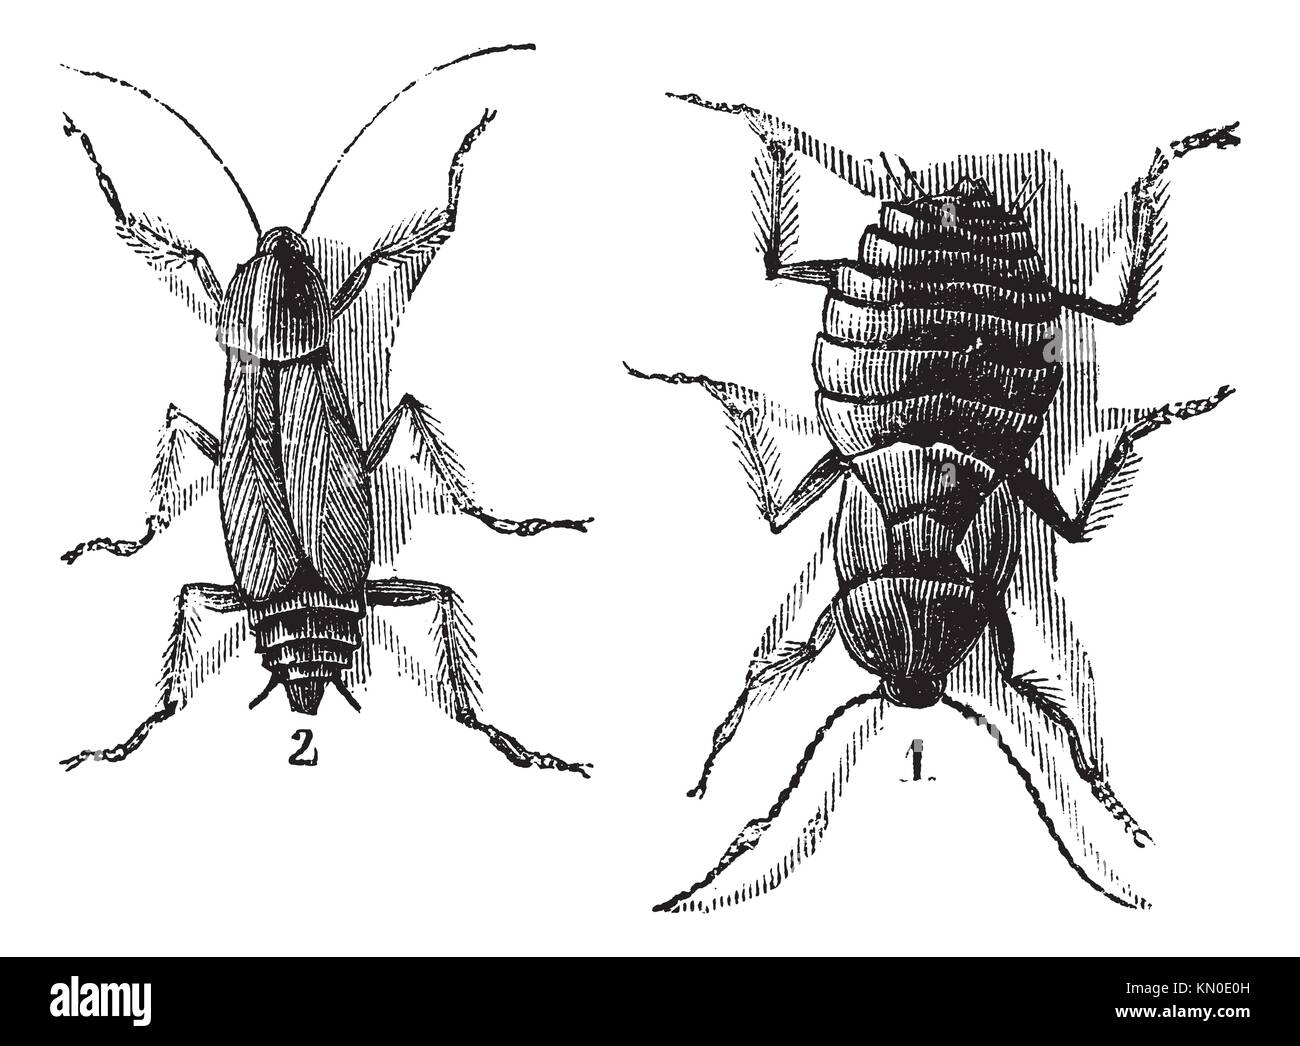 Male and Female, Cockroaches, vintage engraved illustration of Cockroaches Stock Photo